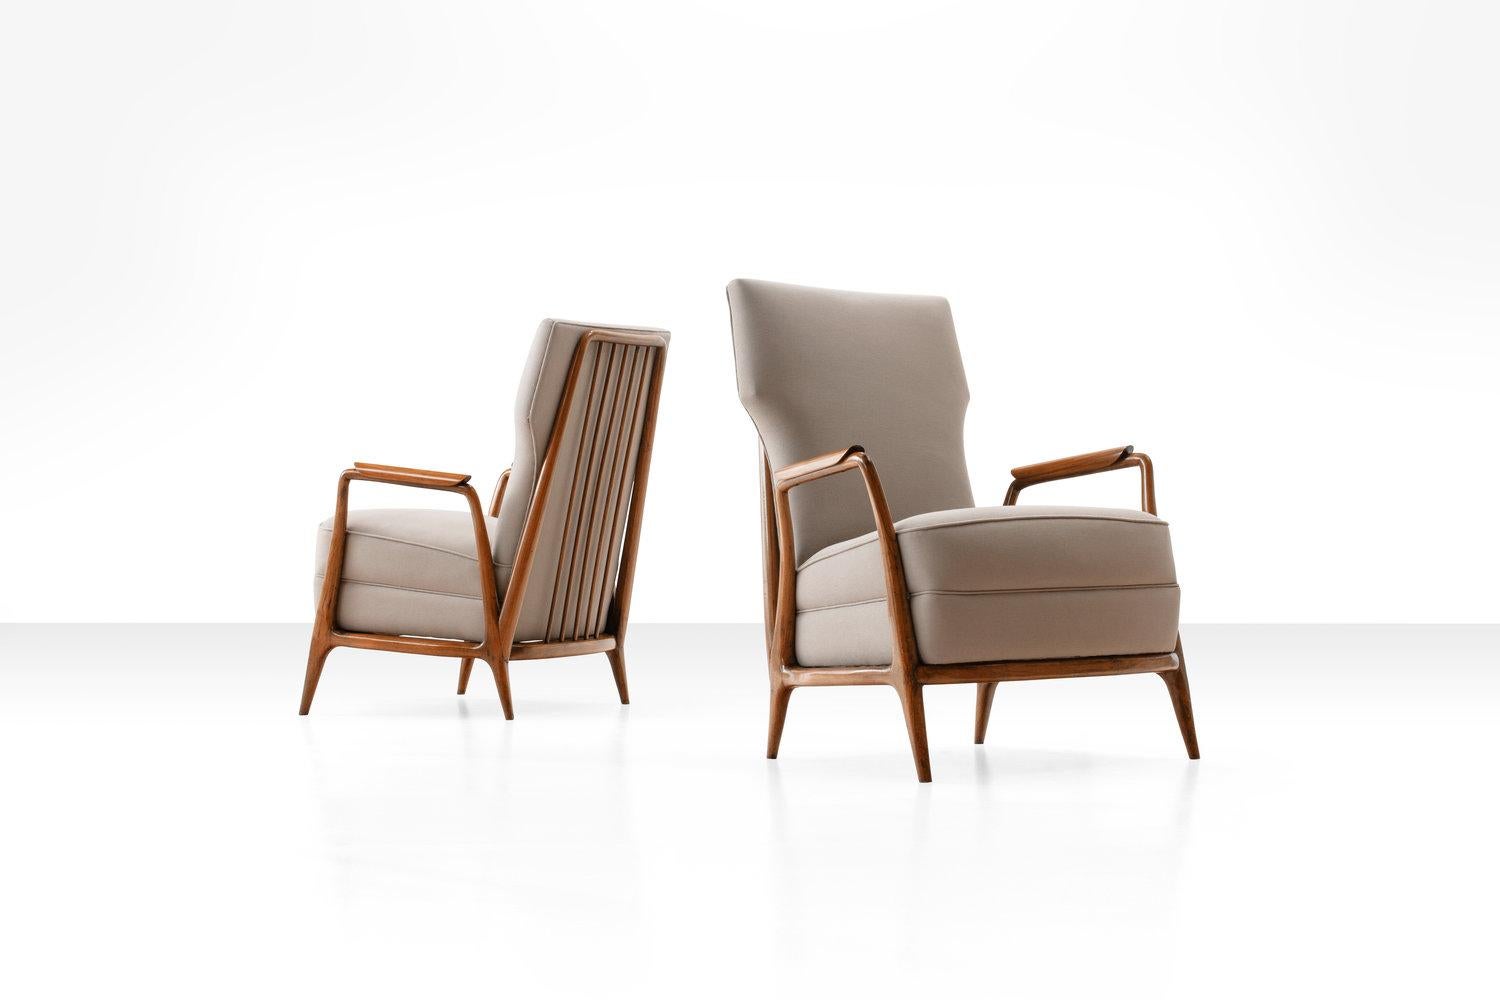 Pair of Giuseppe Scapinelli high back chairs in Caviuna wood, Brazil, 1950s

This pair of two high back armchairs has the typical Scapinelli style with its curvy lines and soft sensual shapes. The elegant lines of this design are beautifully